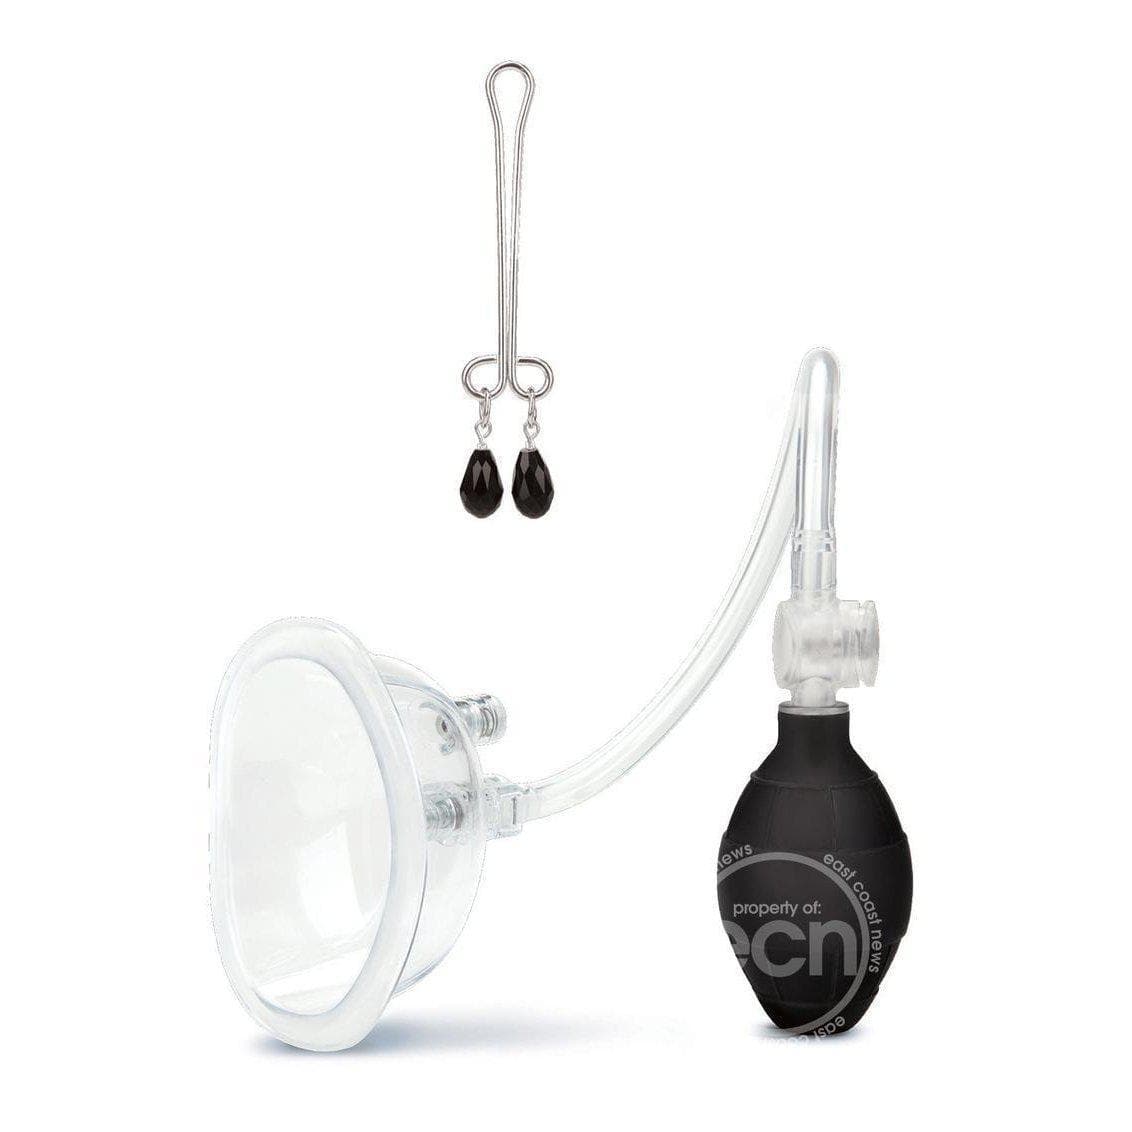 Lux F Deluxe Vagina & Clitoris Pump - Clear - Romantic Blessings